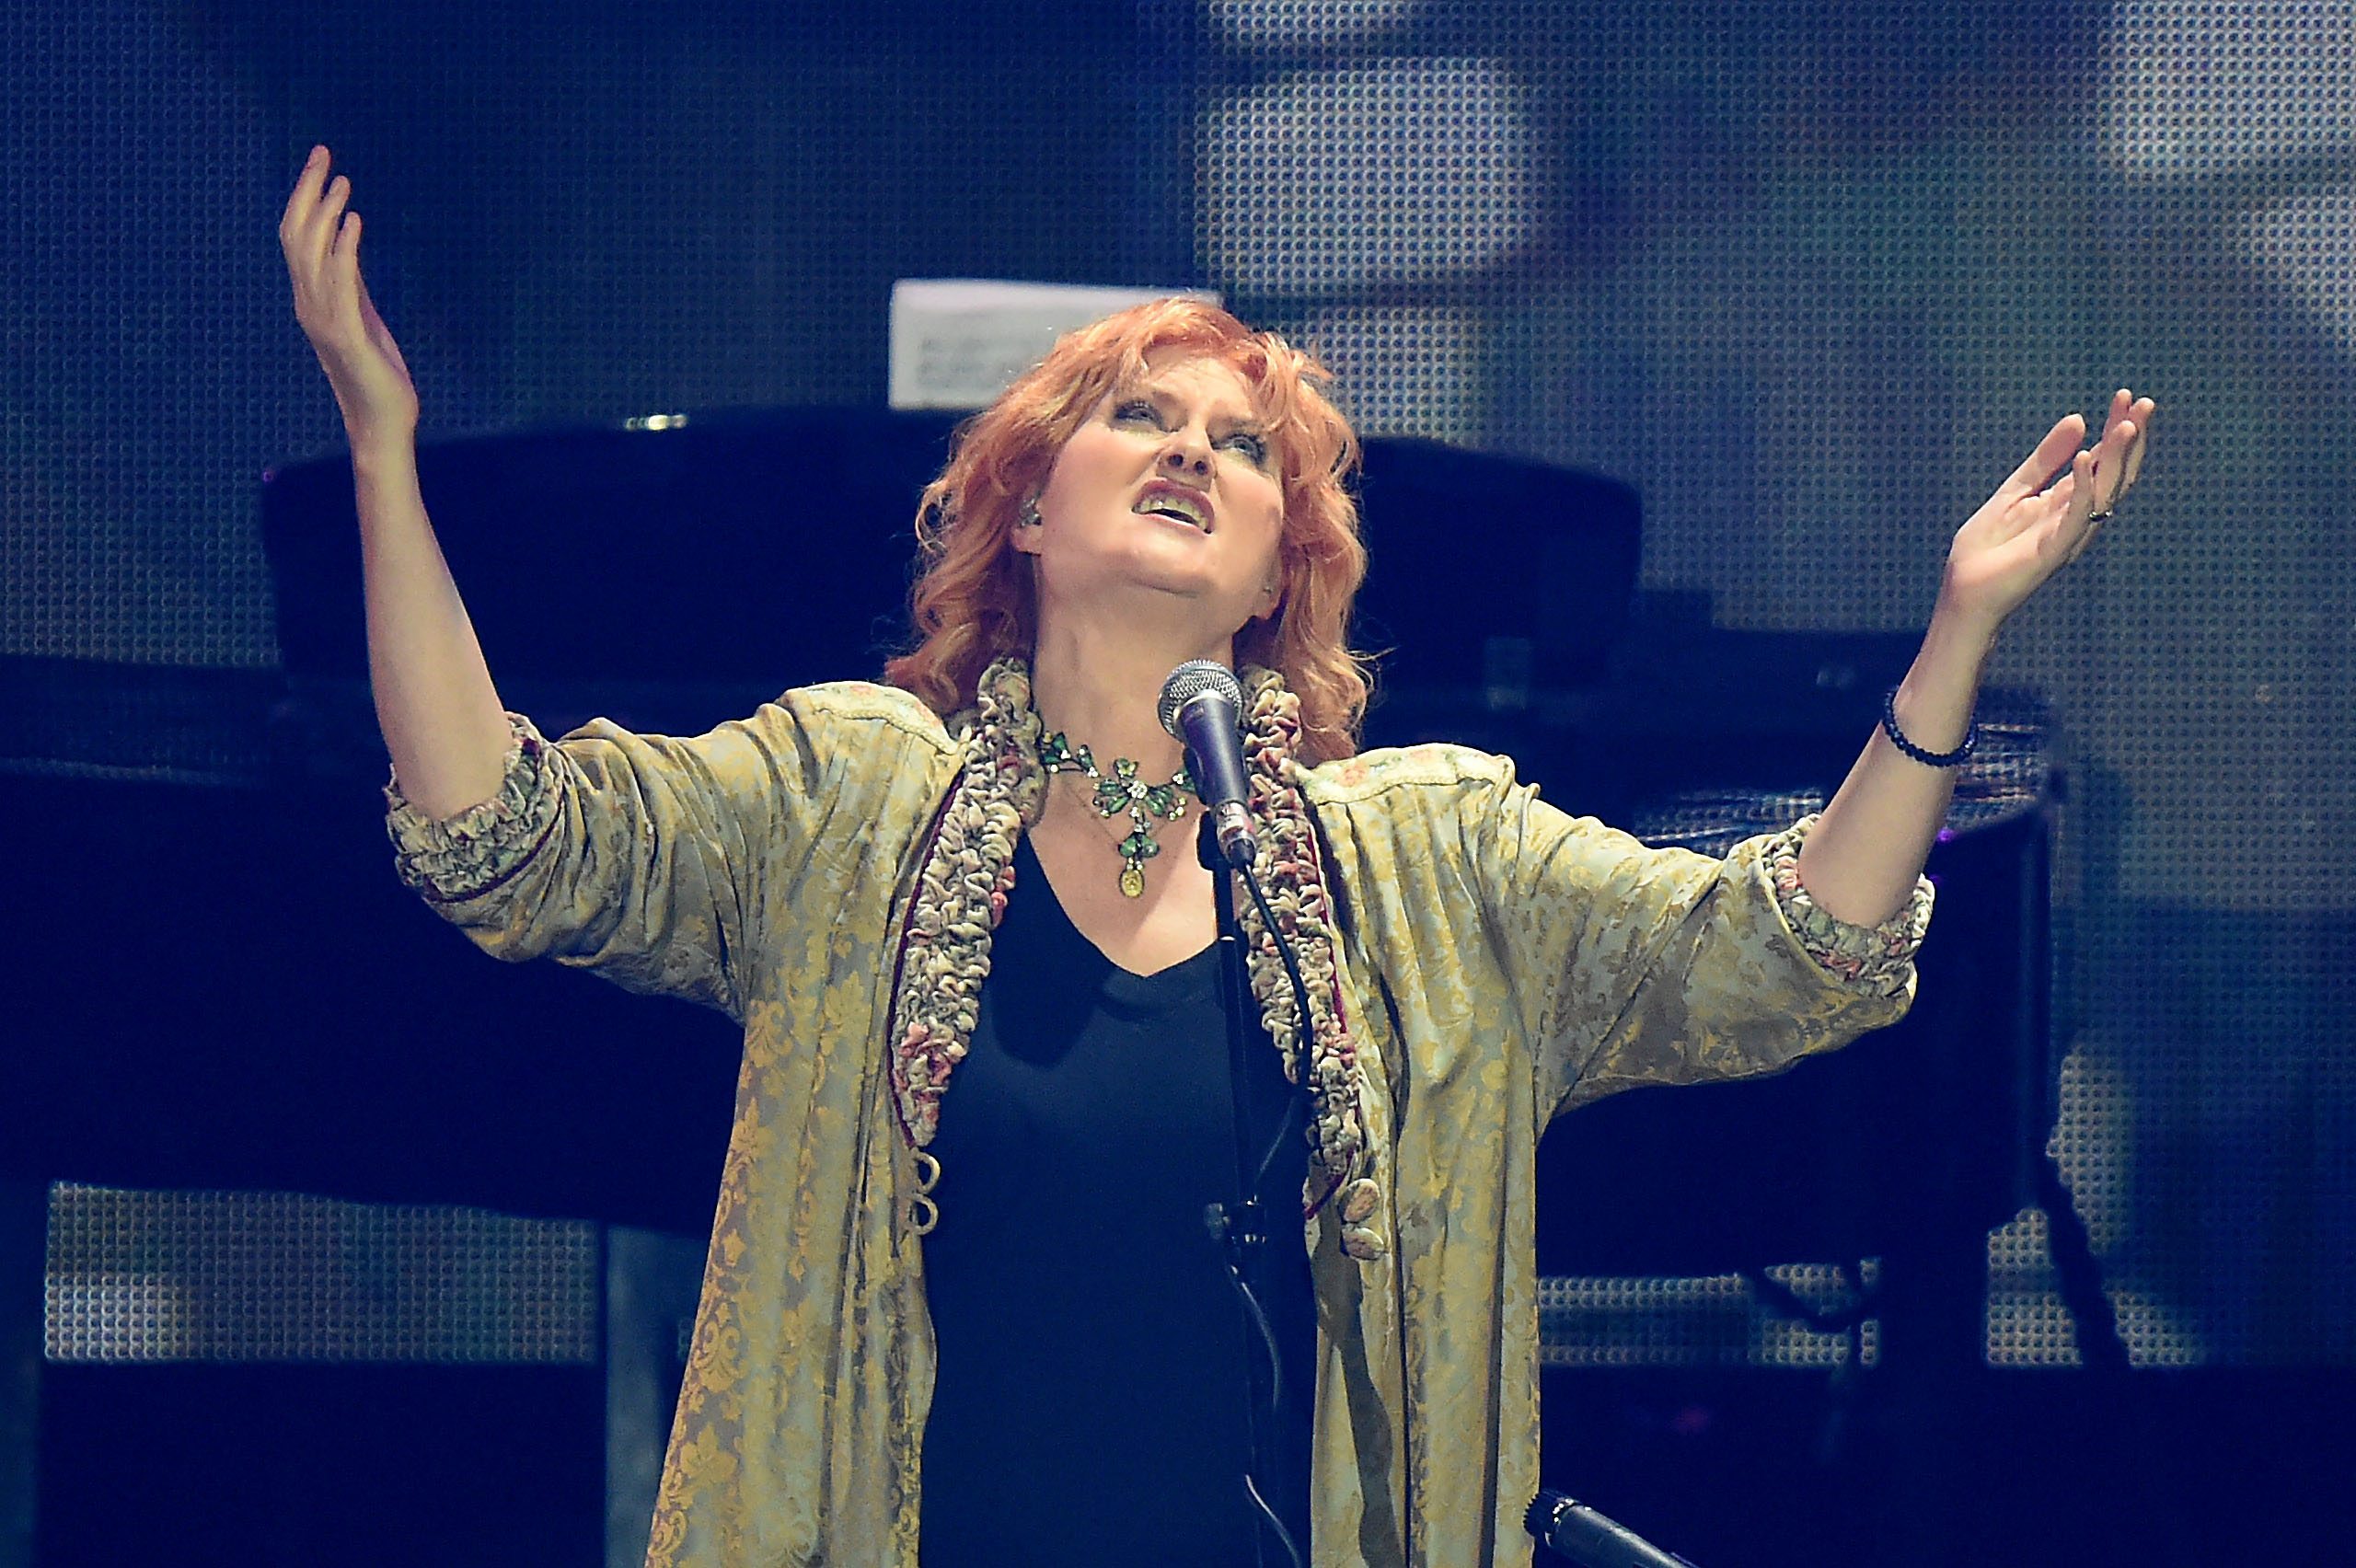 Eddi Reader performs at the Hydro in Glasgow in 2014.